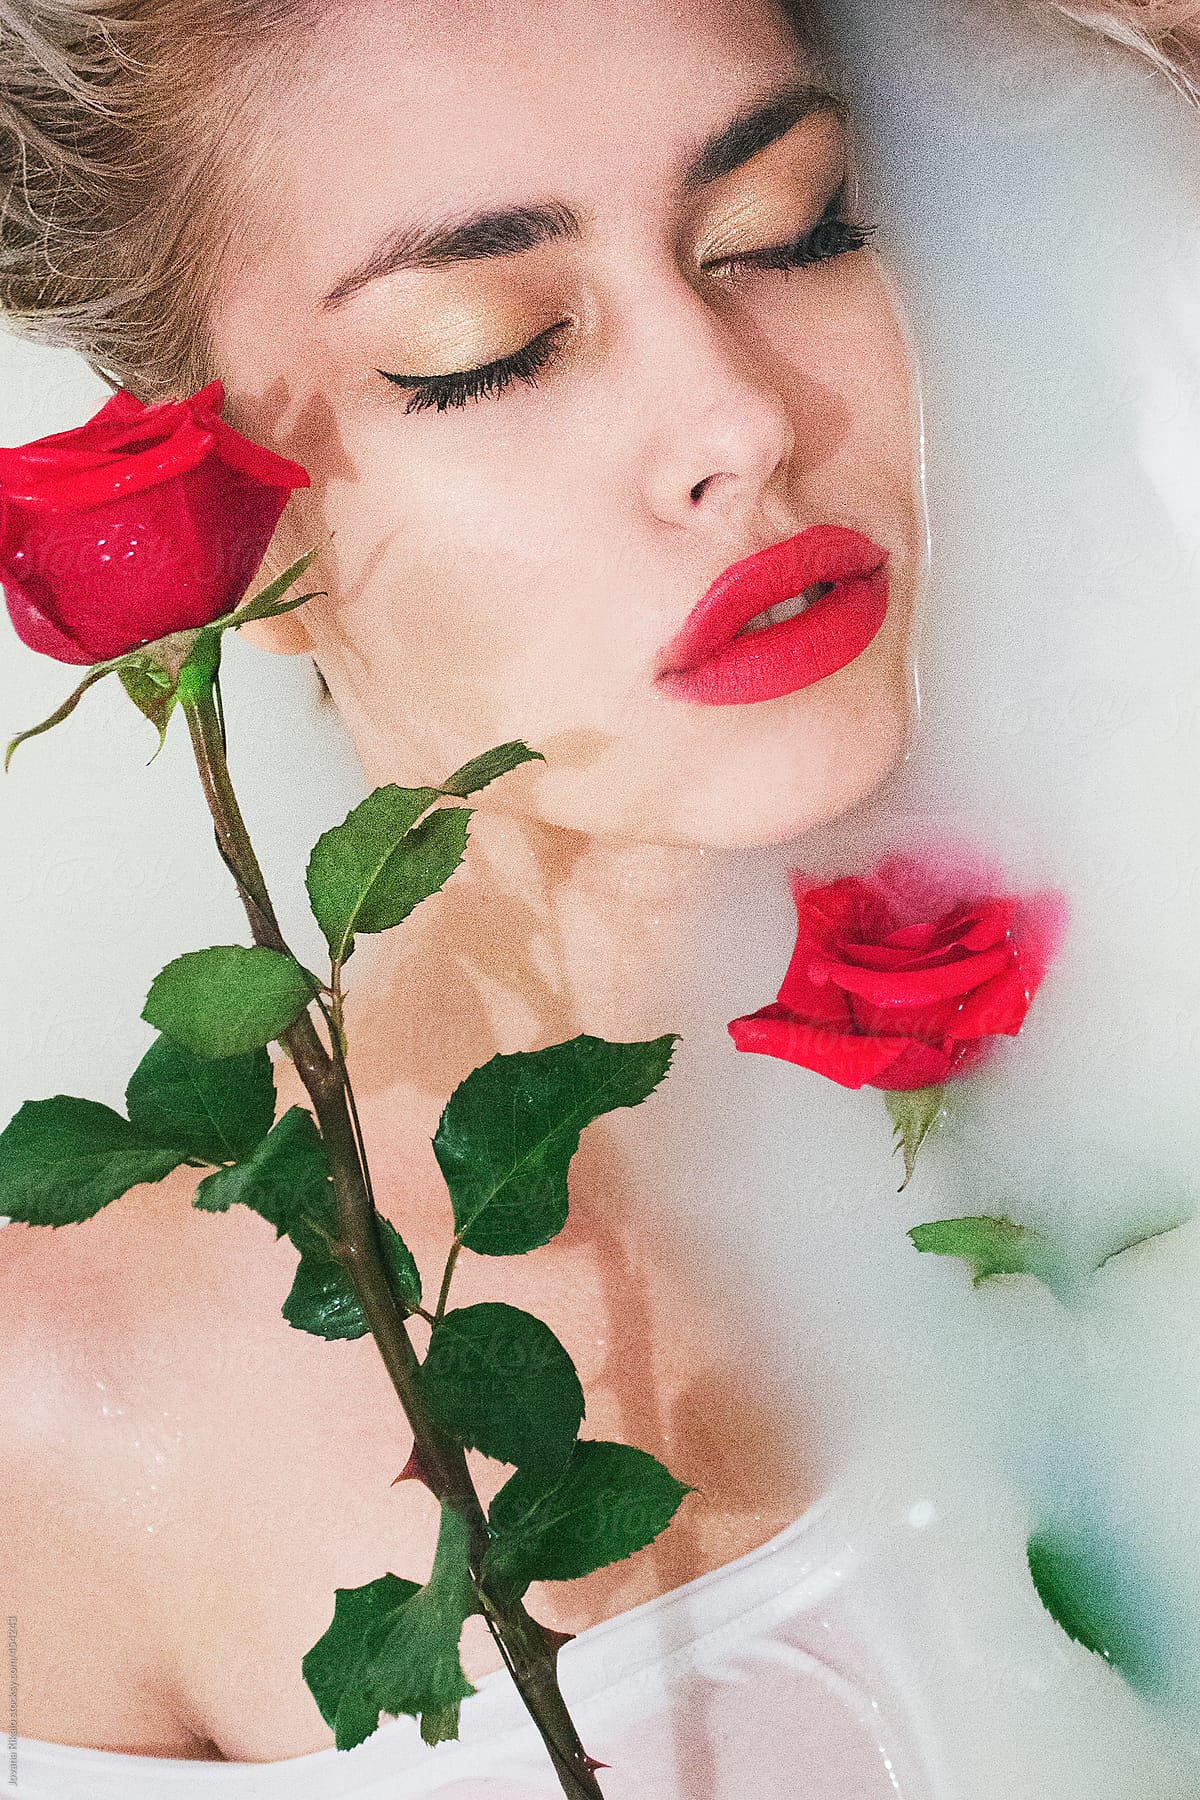 An Attractive Young Woman Lies In Milk Bath By Stocksy Contributor Jovana Rikalo Stocksy